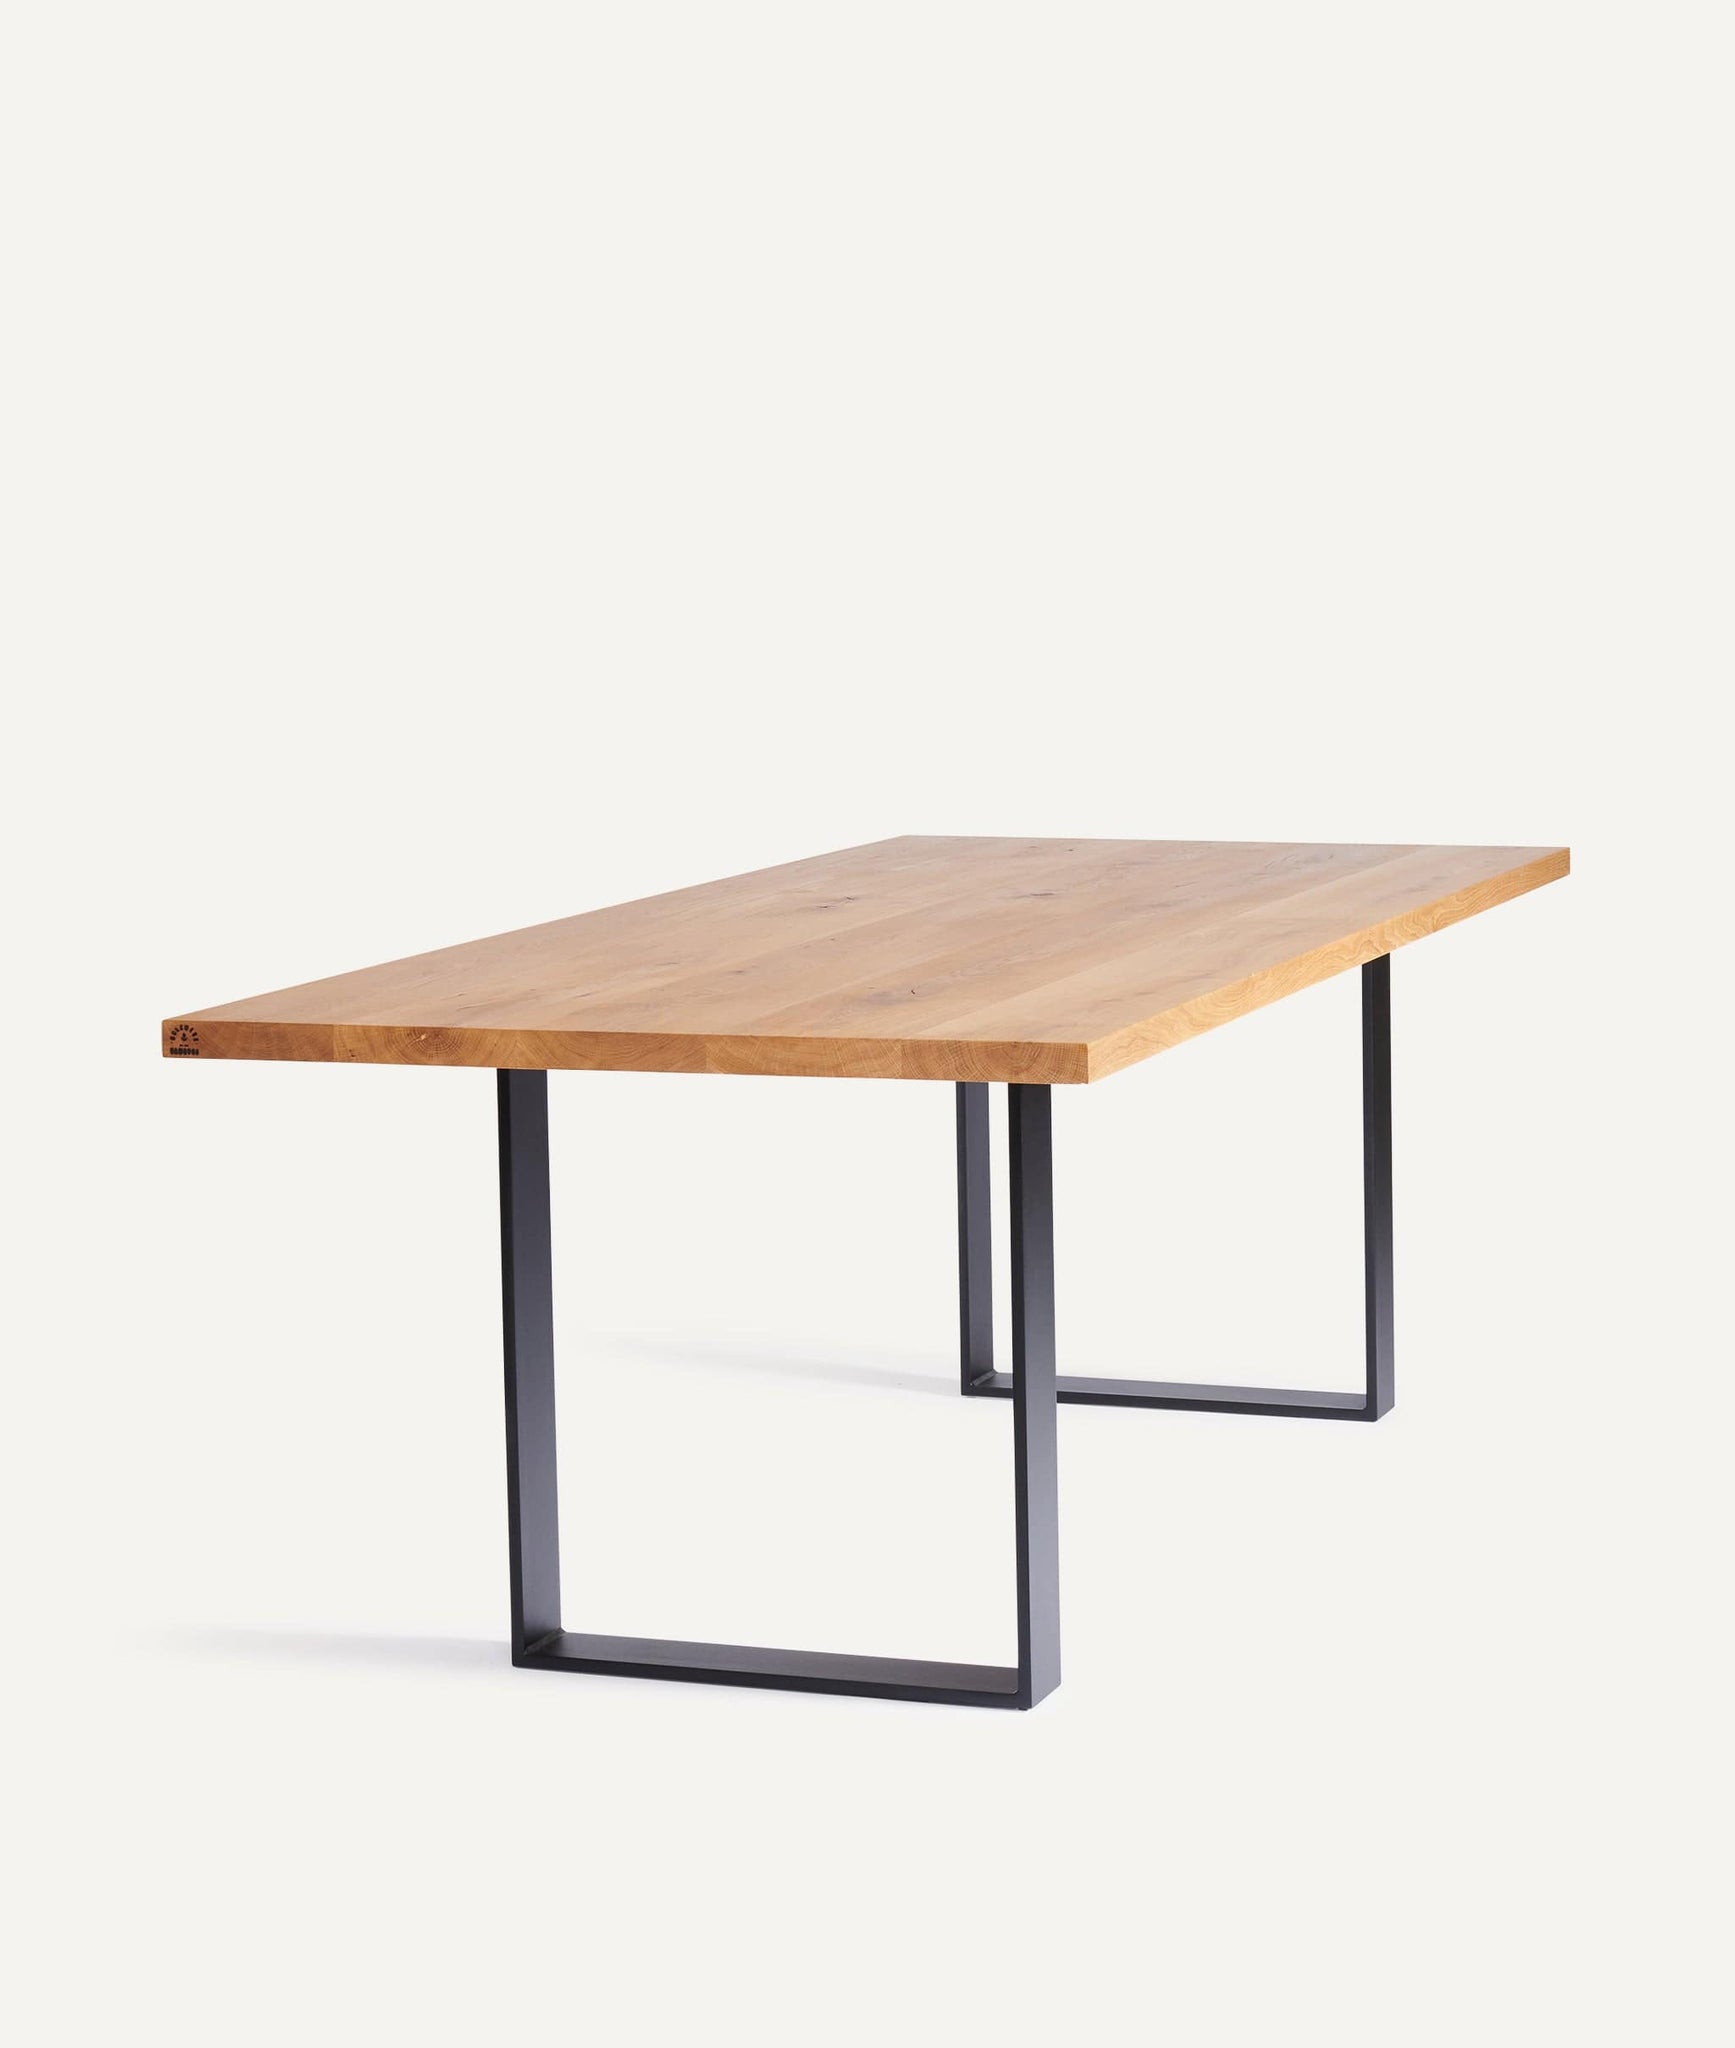 Solid Wood Table in European Oak (natural edge) with Flat Steel Frame